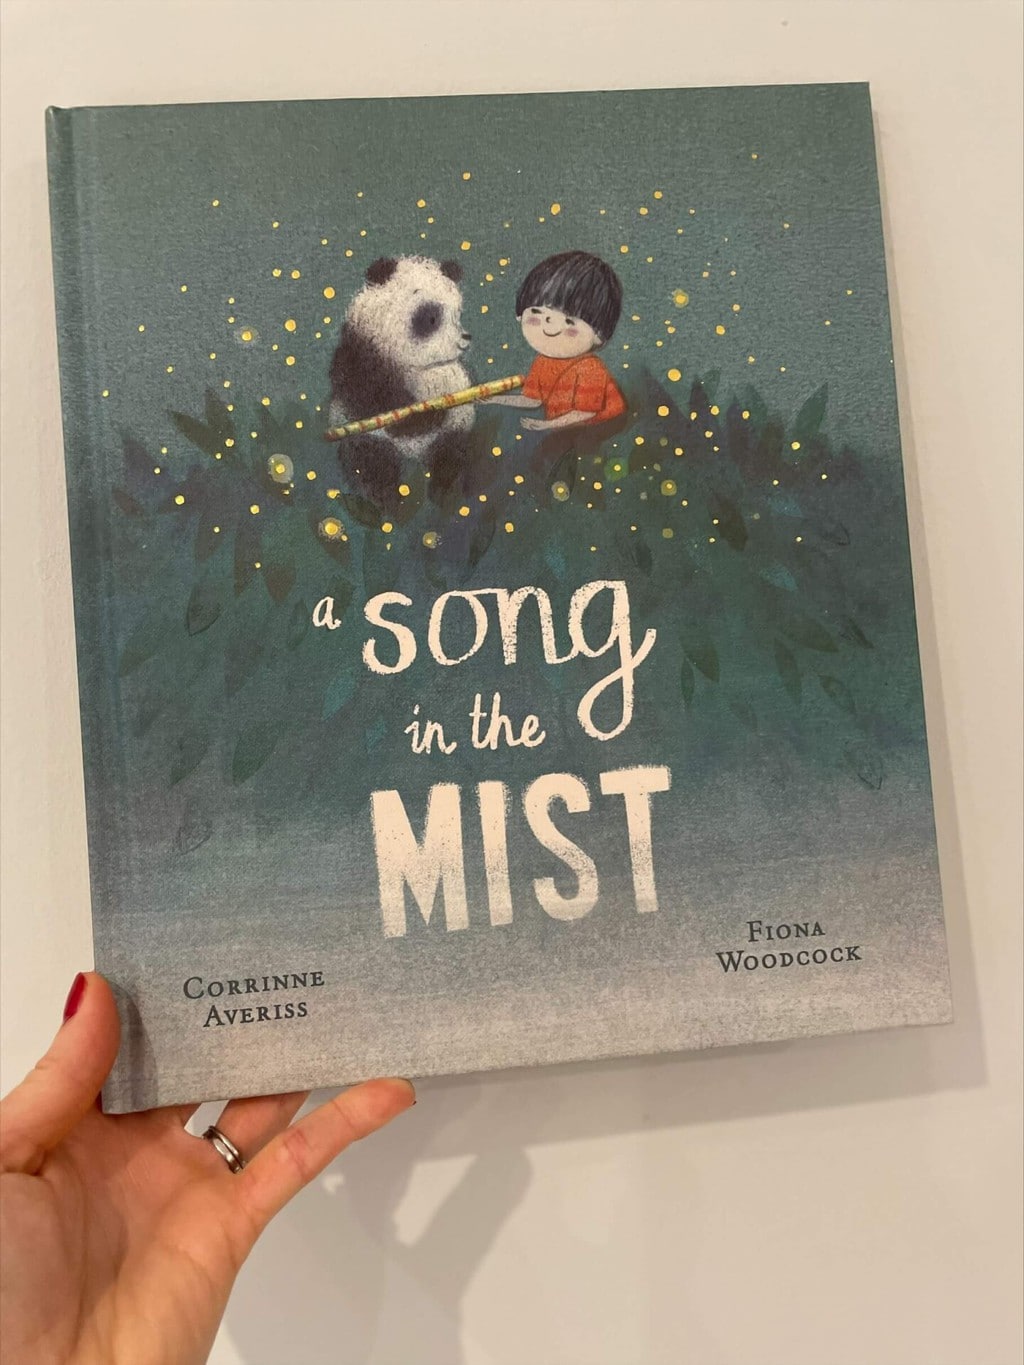 A Song in the Mist – Corrine Averiss (author), Fiona Woodcock (illustrator) Oxford University Press (publisher)